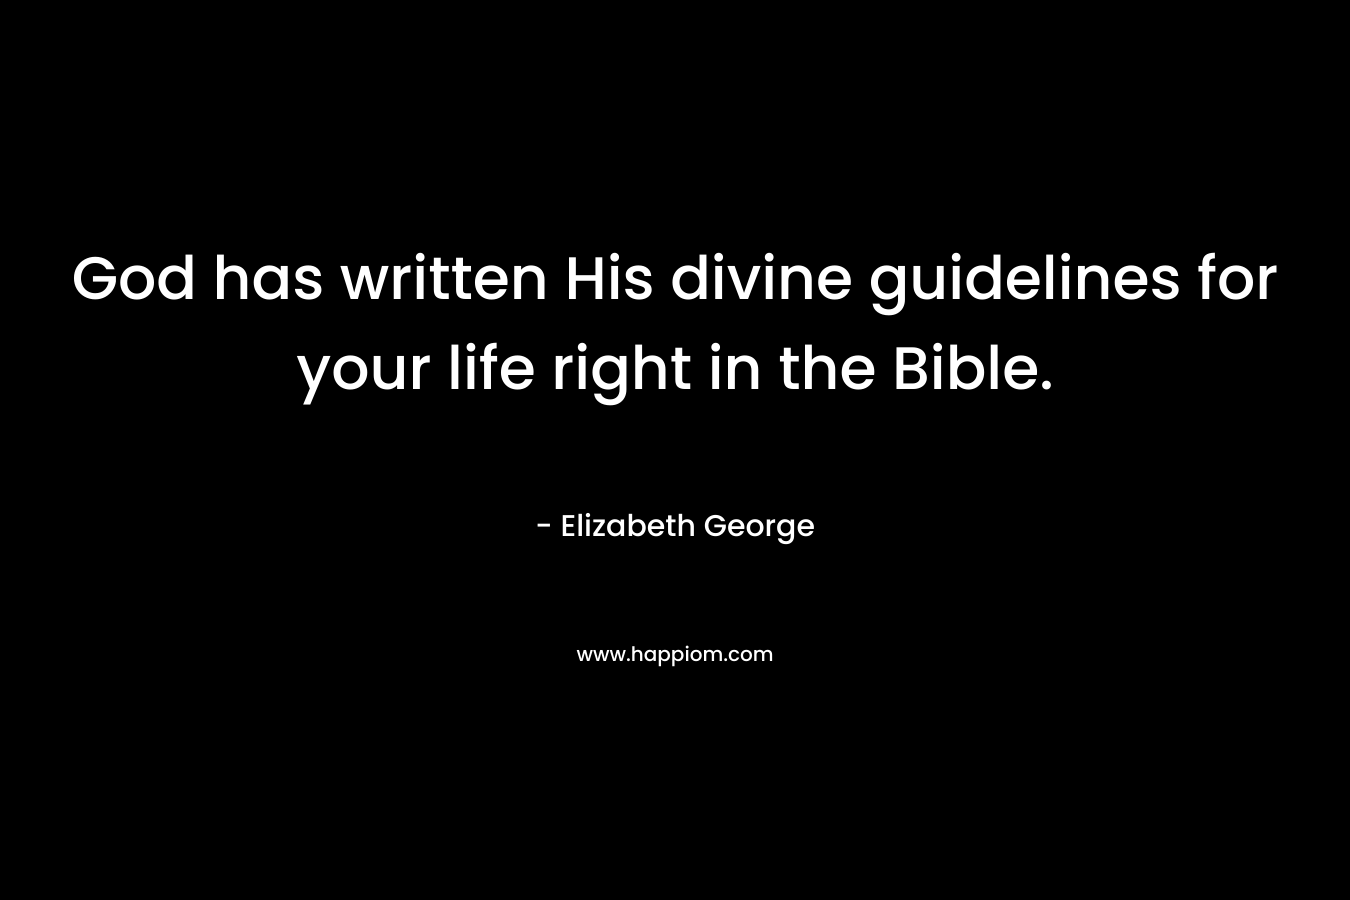 God has written His divine guidelines for your life right in the Bible.